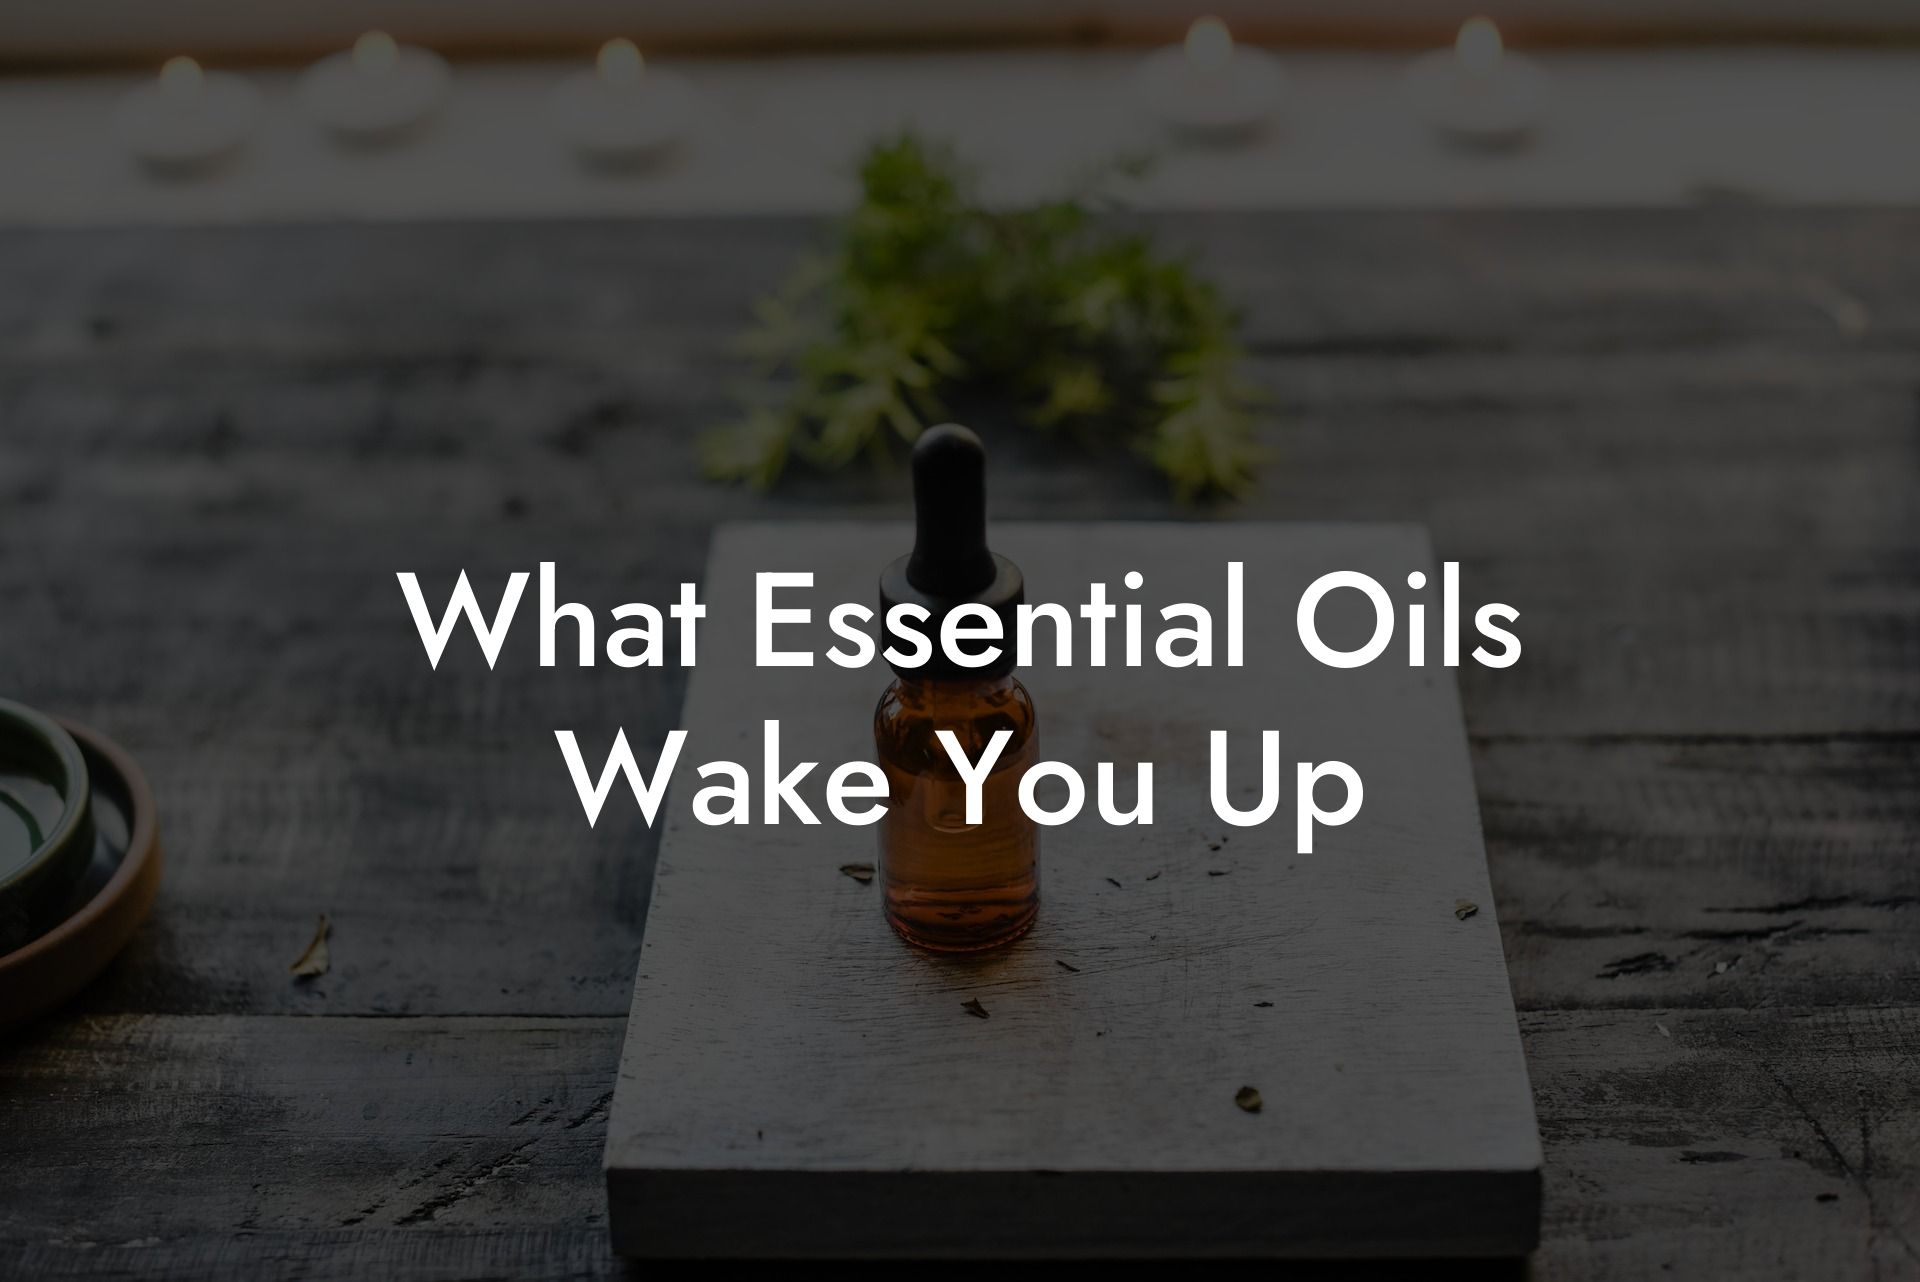 What Essential Oils Wake You Up